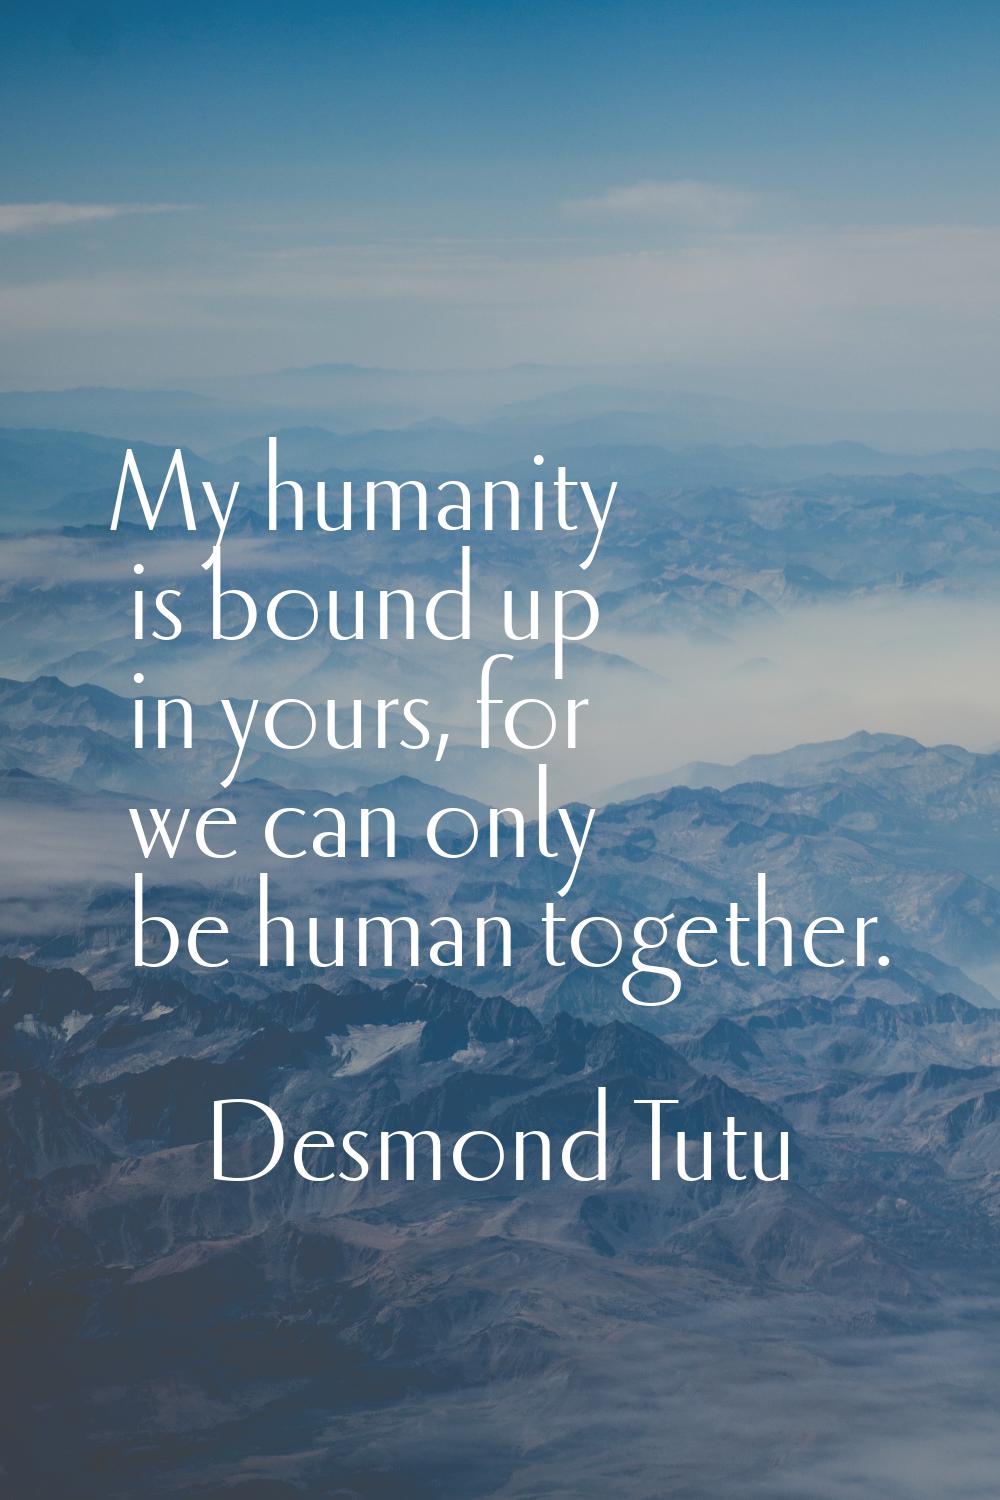 My humanity is bound up in yours, for we can only be human together.